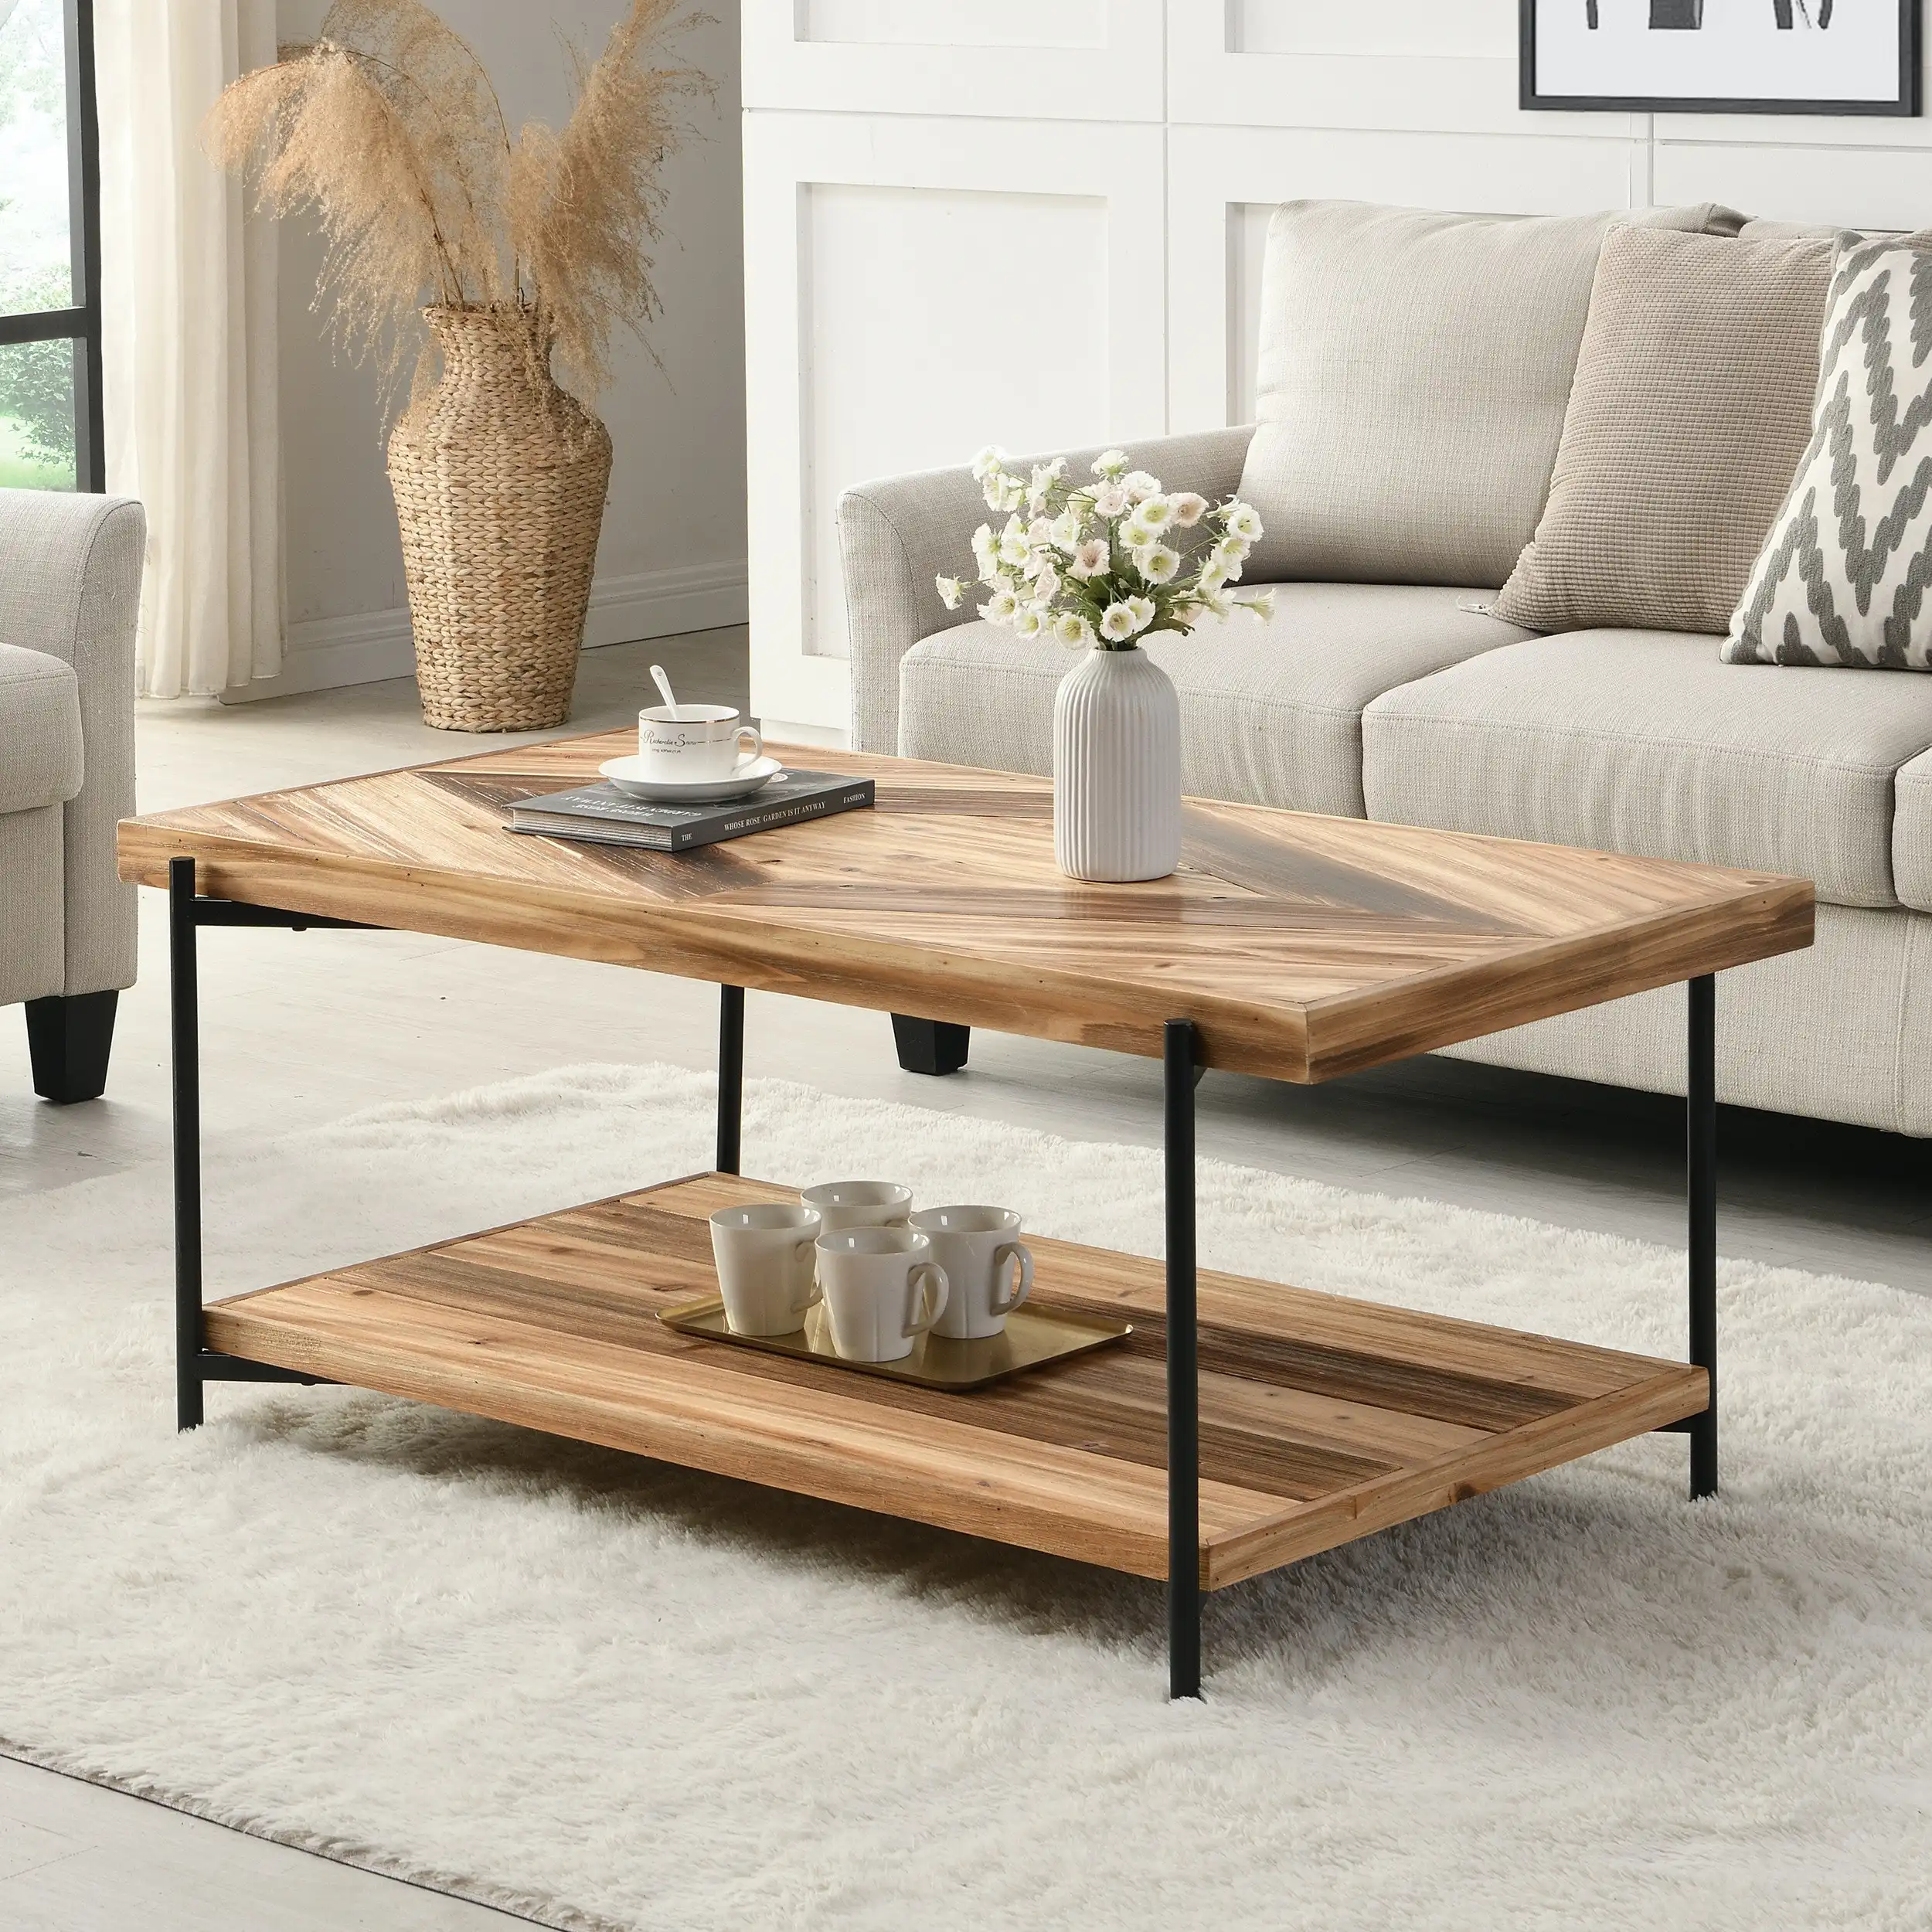 IHOMDEC 2-Tier Rectangle Metal & Fir Wood Coffee Table with Top Unique Diamond Pattern Brown